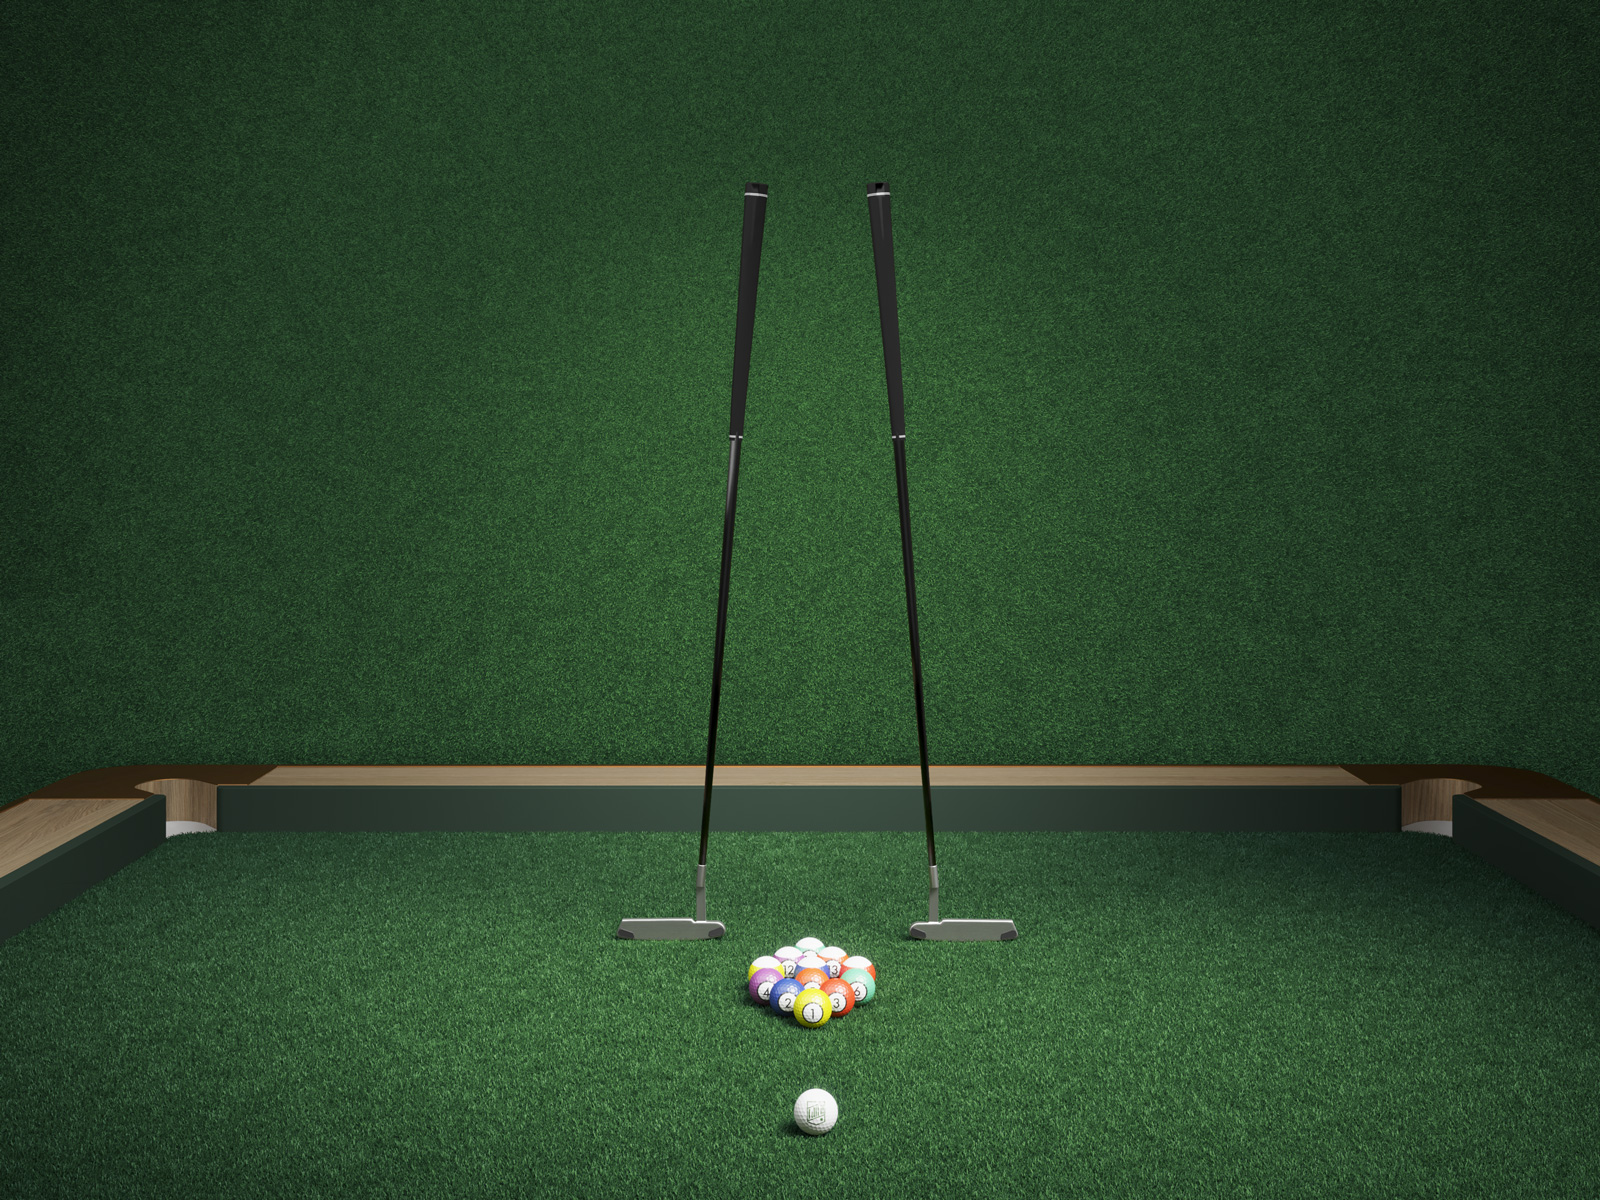 An oversized billiards table with turf surface, atop it are 12 golf balls of different colors and two black golf putters.